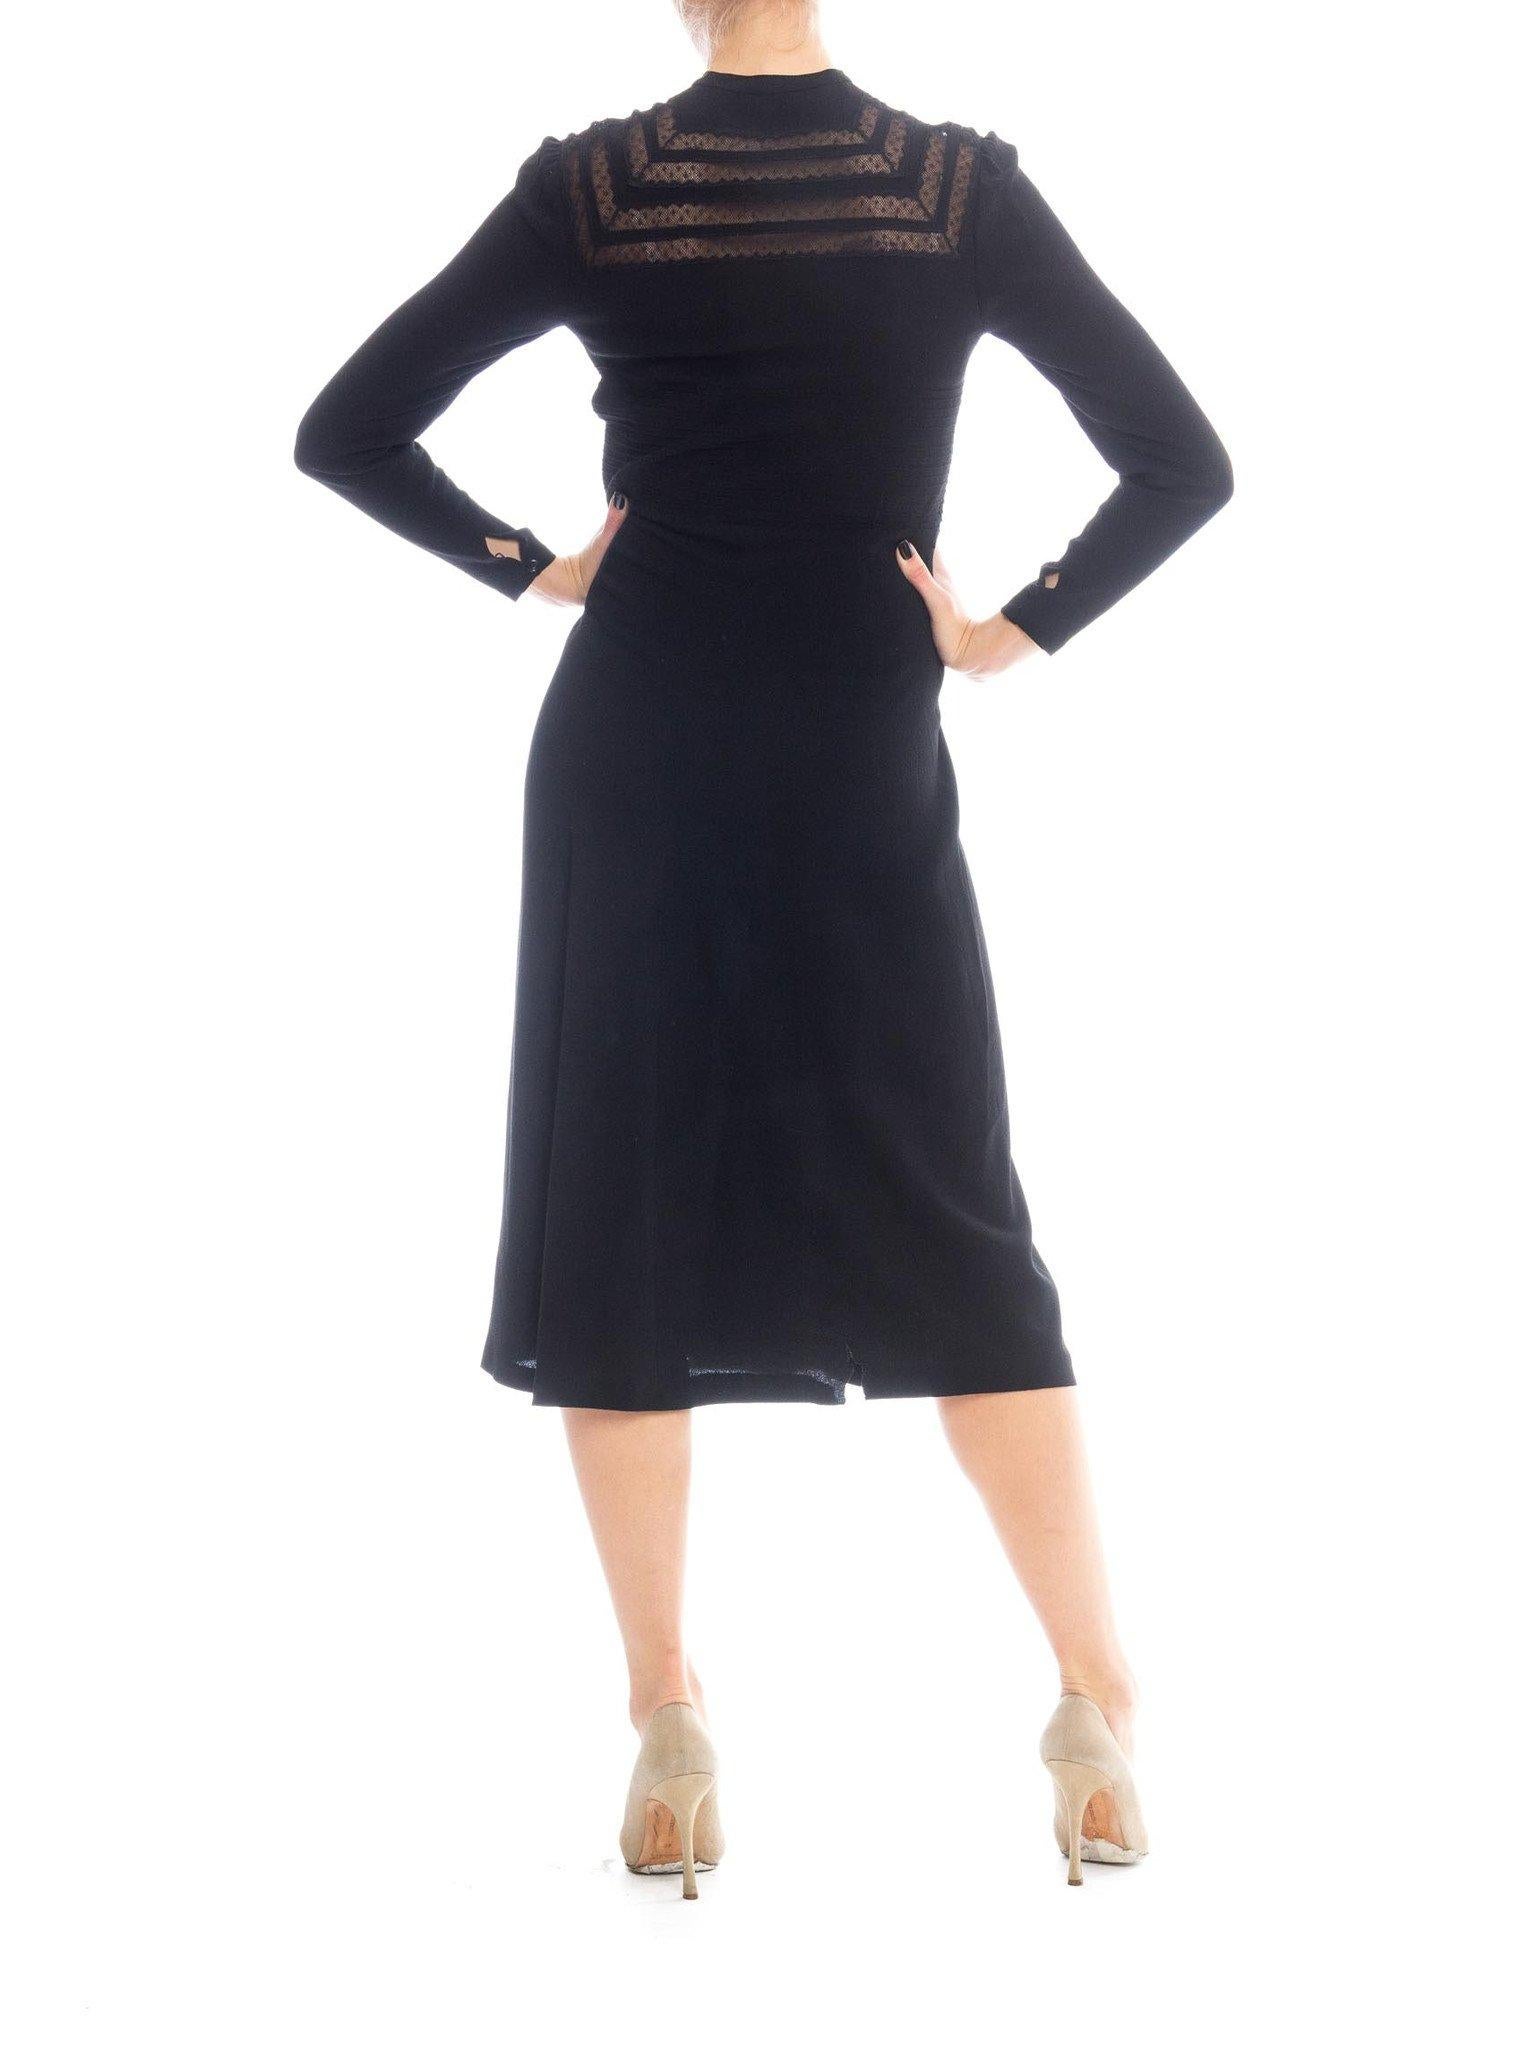 Women's 1940S Black Rayon Crepe Long Sleeve Dress With Lace Insertion & Pin Tucked Bodi For Sale